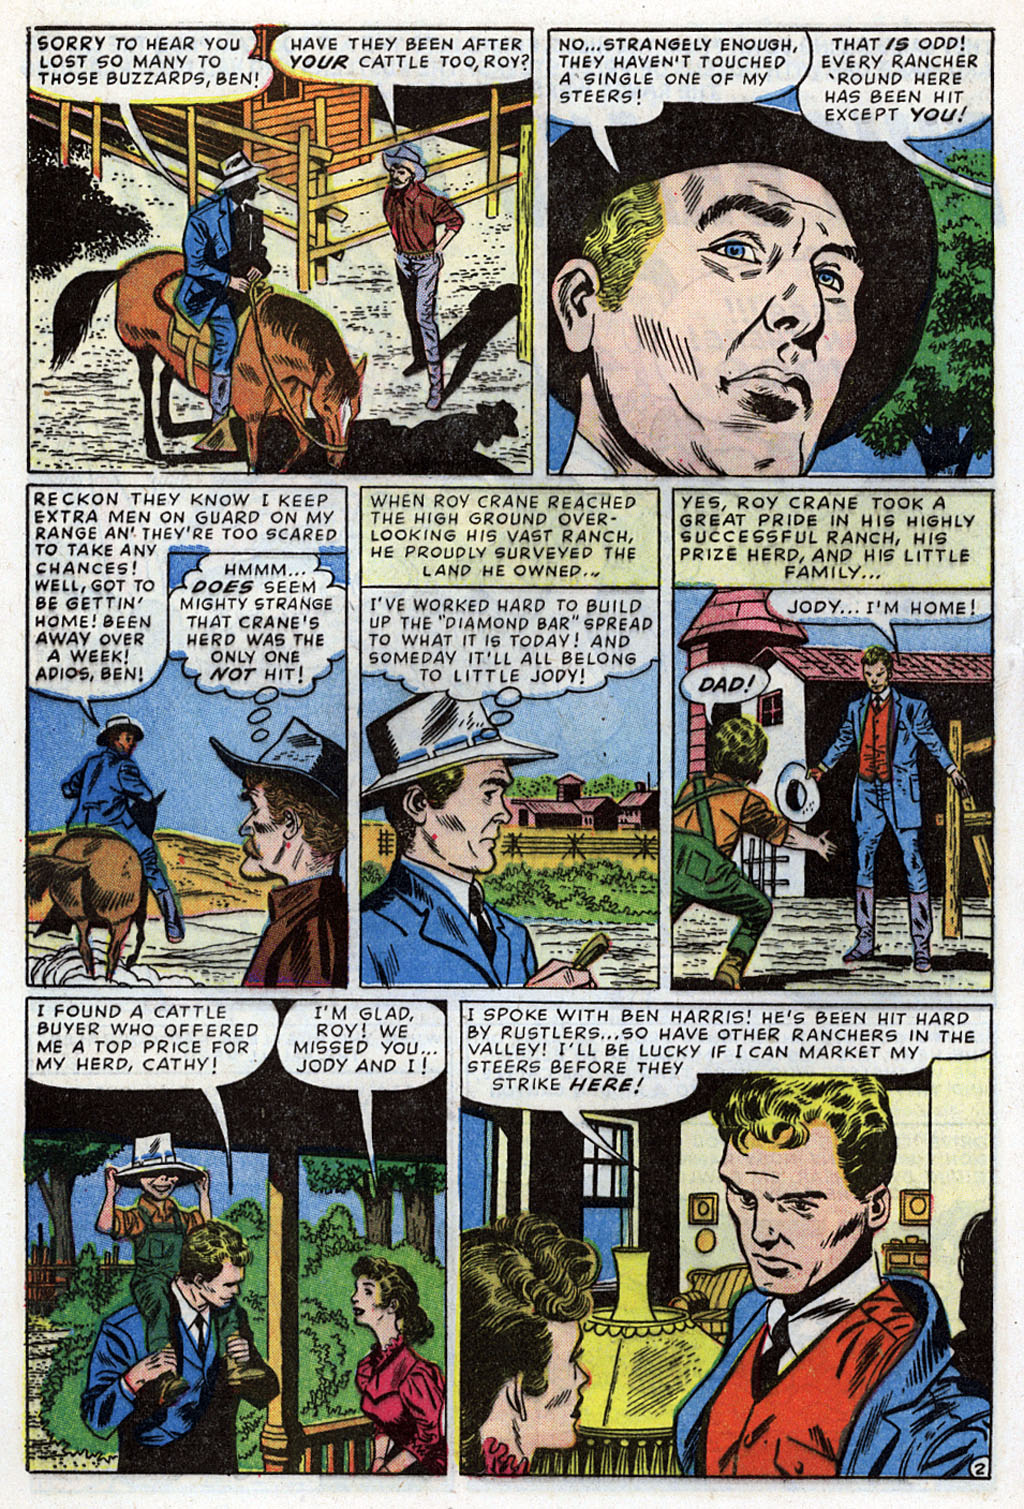 Read online Cowboy Action comic -  Issue #9 - 28